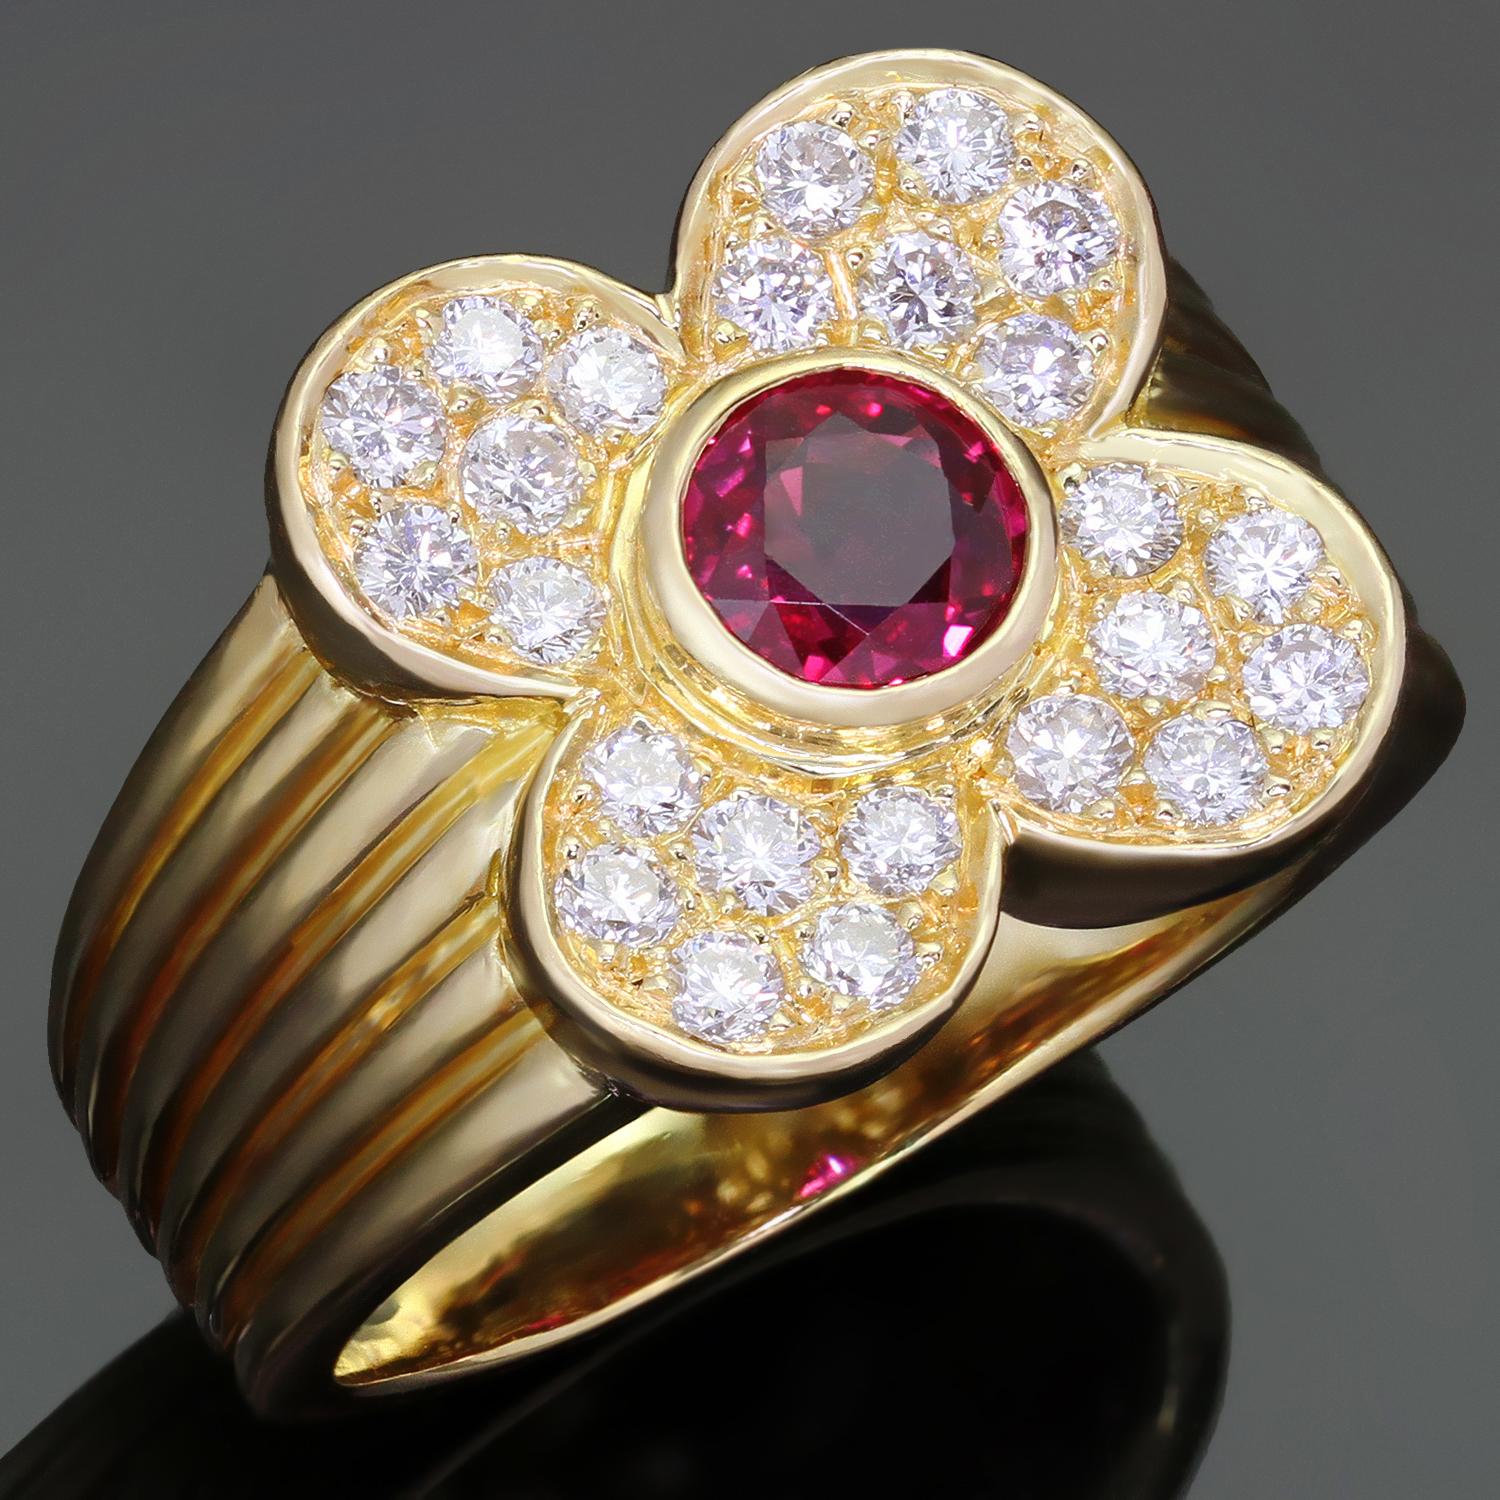 This gorgeous Van Cleef & Arpels ring features the lucky four-leaf clover design crafted in 18k yellow gold and set with a genuine round red ruby of an estimated 0.78 carats surrounded with brilliant-cut round D-F VVS1-VVS2 diamonds of an estimated